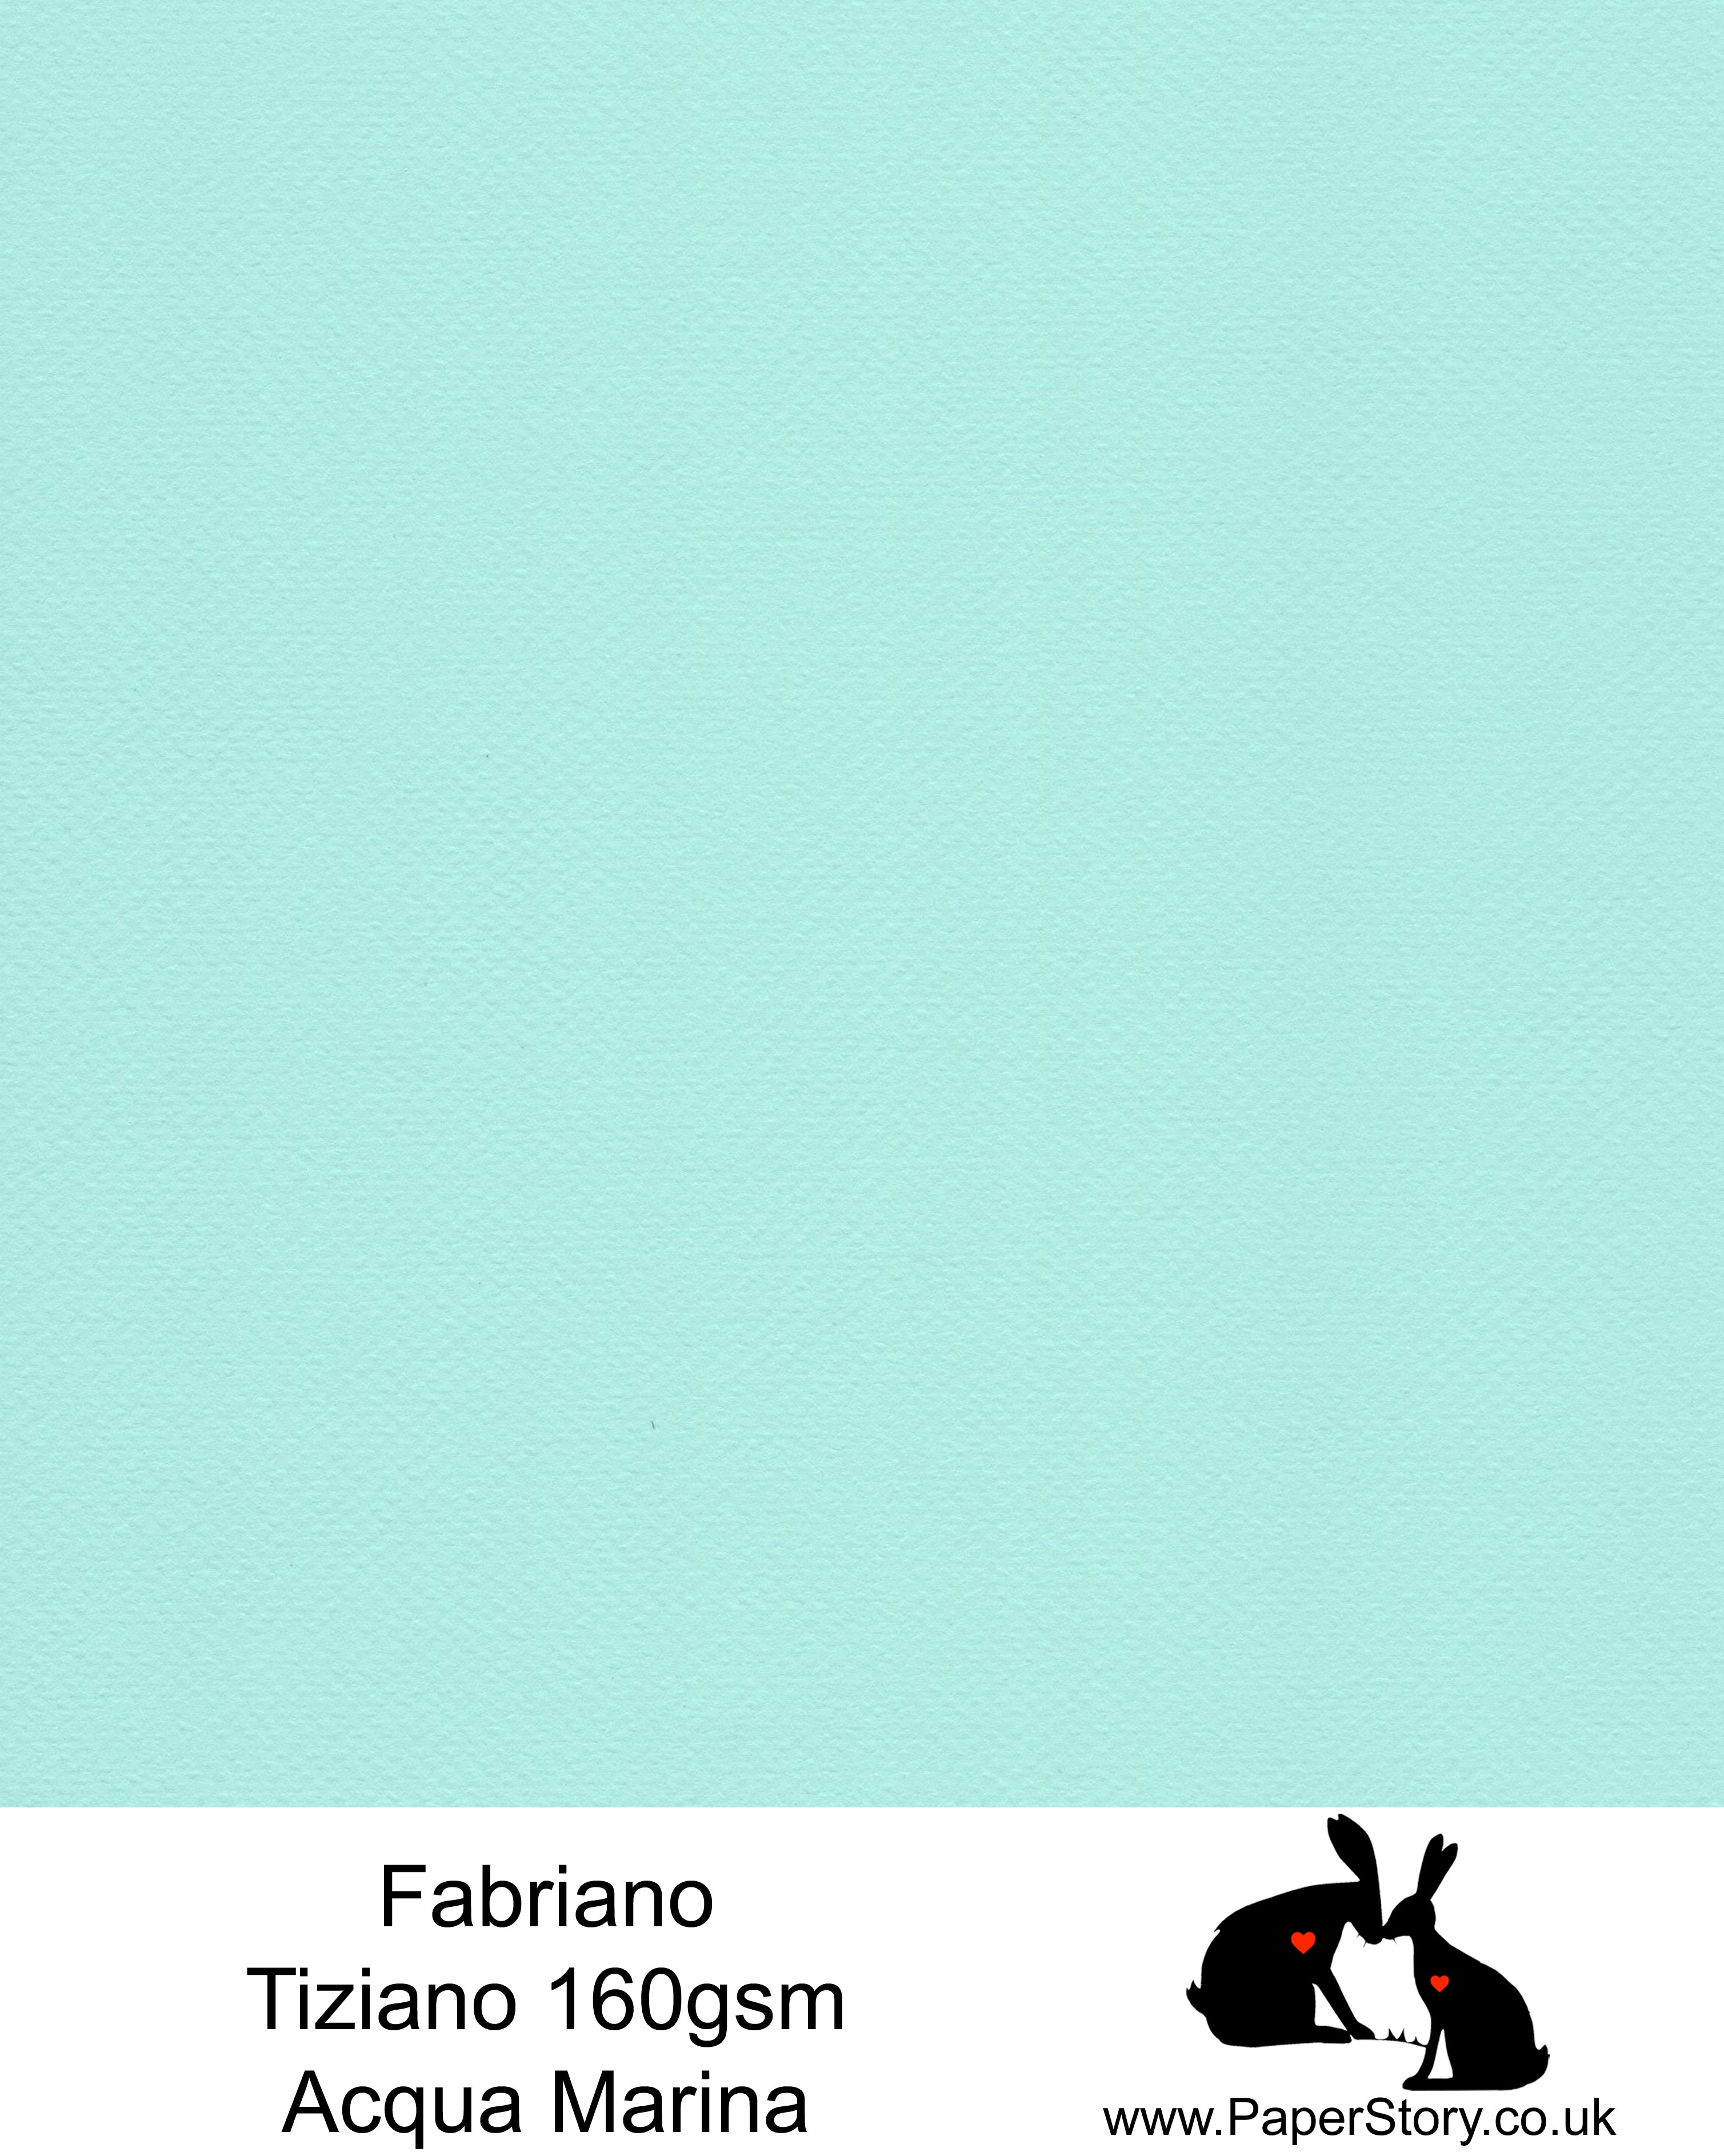 High quality paper from Italy, Acqua Marina Sea Water blue Fabriano Tiziano is 160 gsm, Tiziano has a high cotton content, a textured naturally sized surface. This paper is acid free to guarantee long permanence in time, pH neutral. It has highly lightfast colours, an excellent surface making and sizing which make this paper particularly suitable for papercutting, pastels, pencil, graphite, charcoal, tempera, air brush and watercolour techniques. Tiziano can be used for all printing techniques.